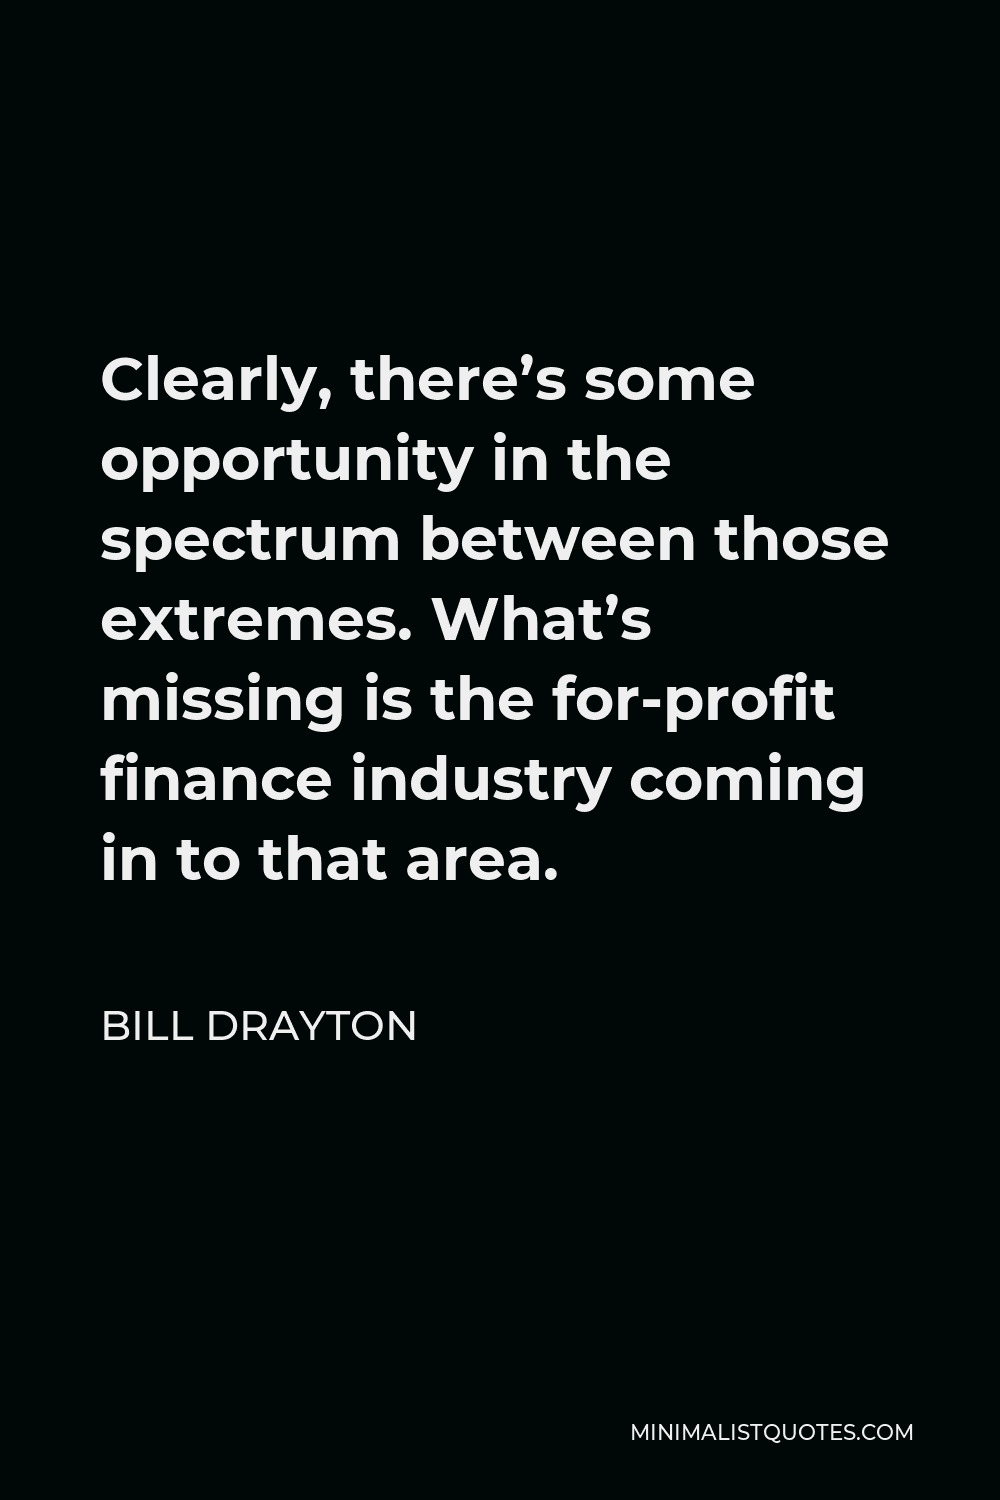 Bill Drayton Quote - Clearly, there’s some opportunity in the spectrum between those extremes. What’s missing is the for-profit finance industry coming in to that area.